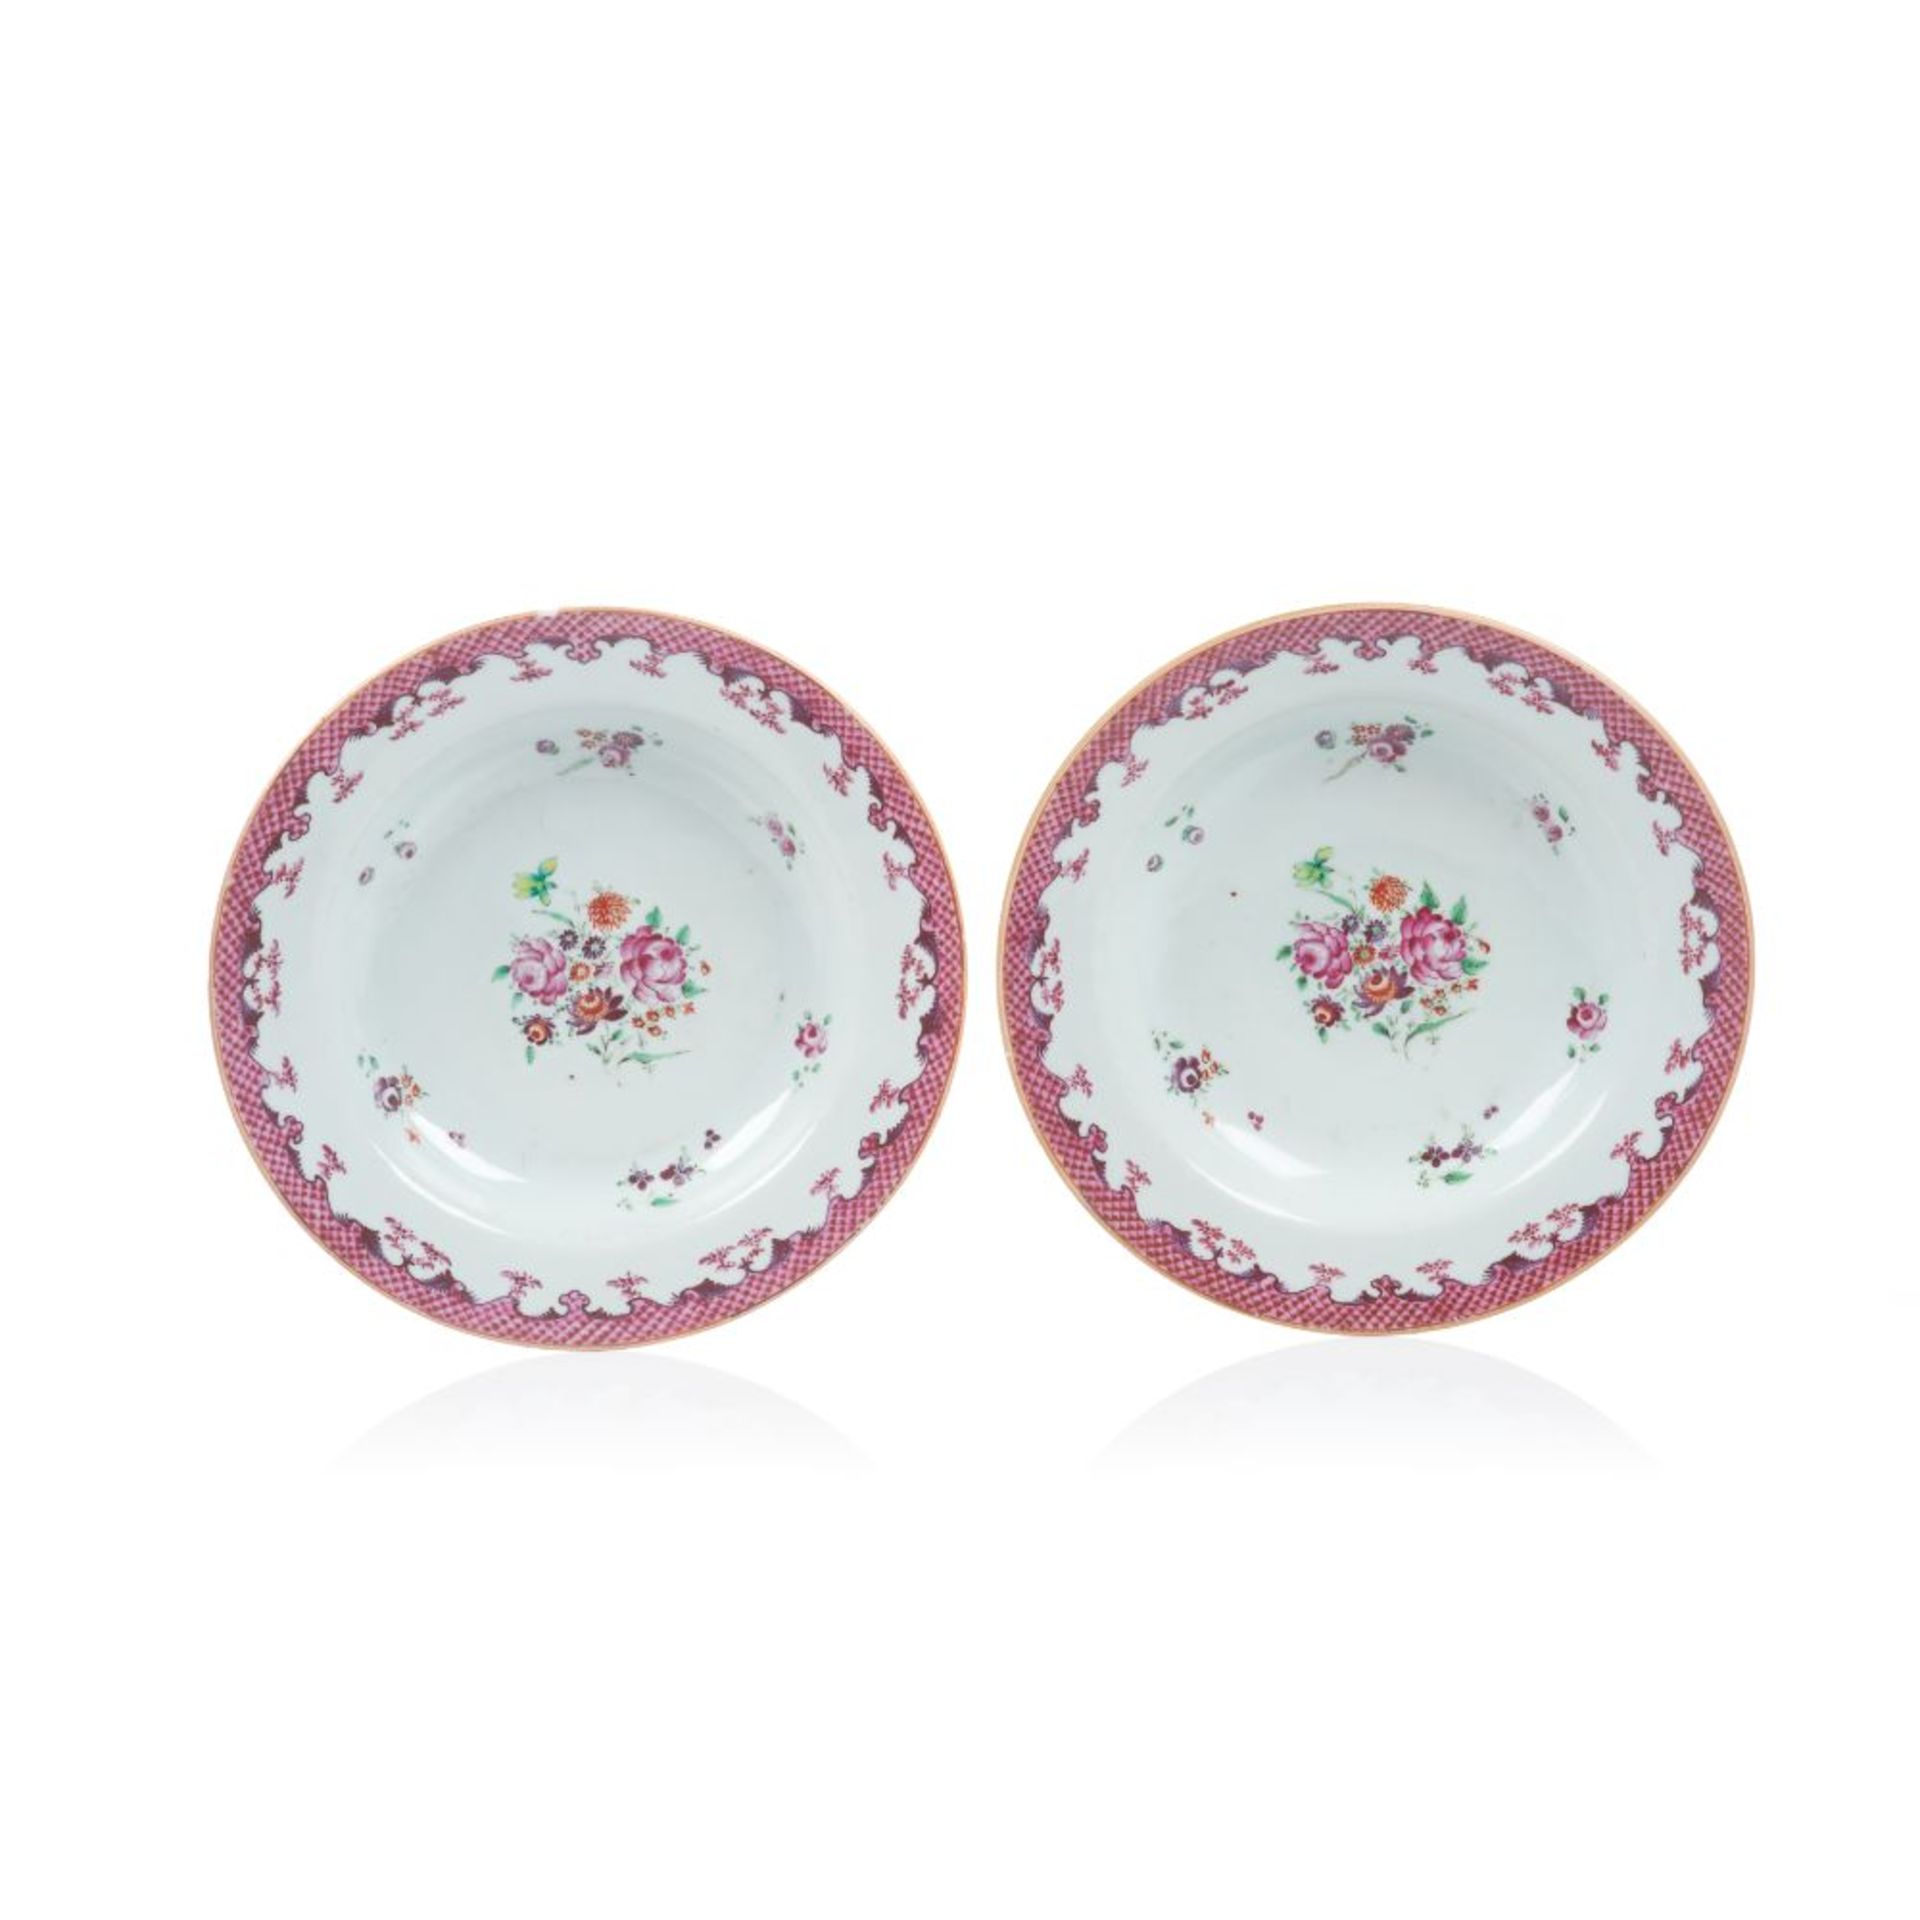 A pair of deep plates, Chinese export porcelain, Polychrome floral "Famille Rose" enamelled